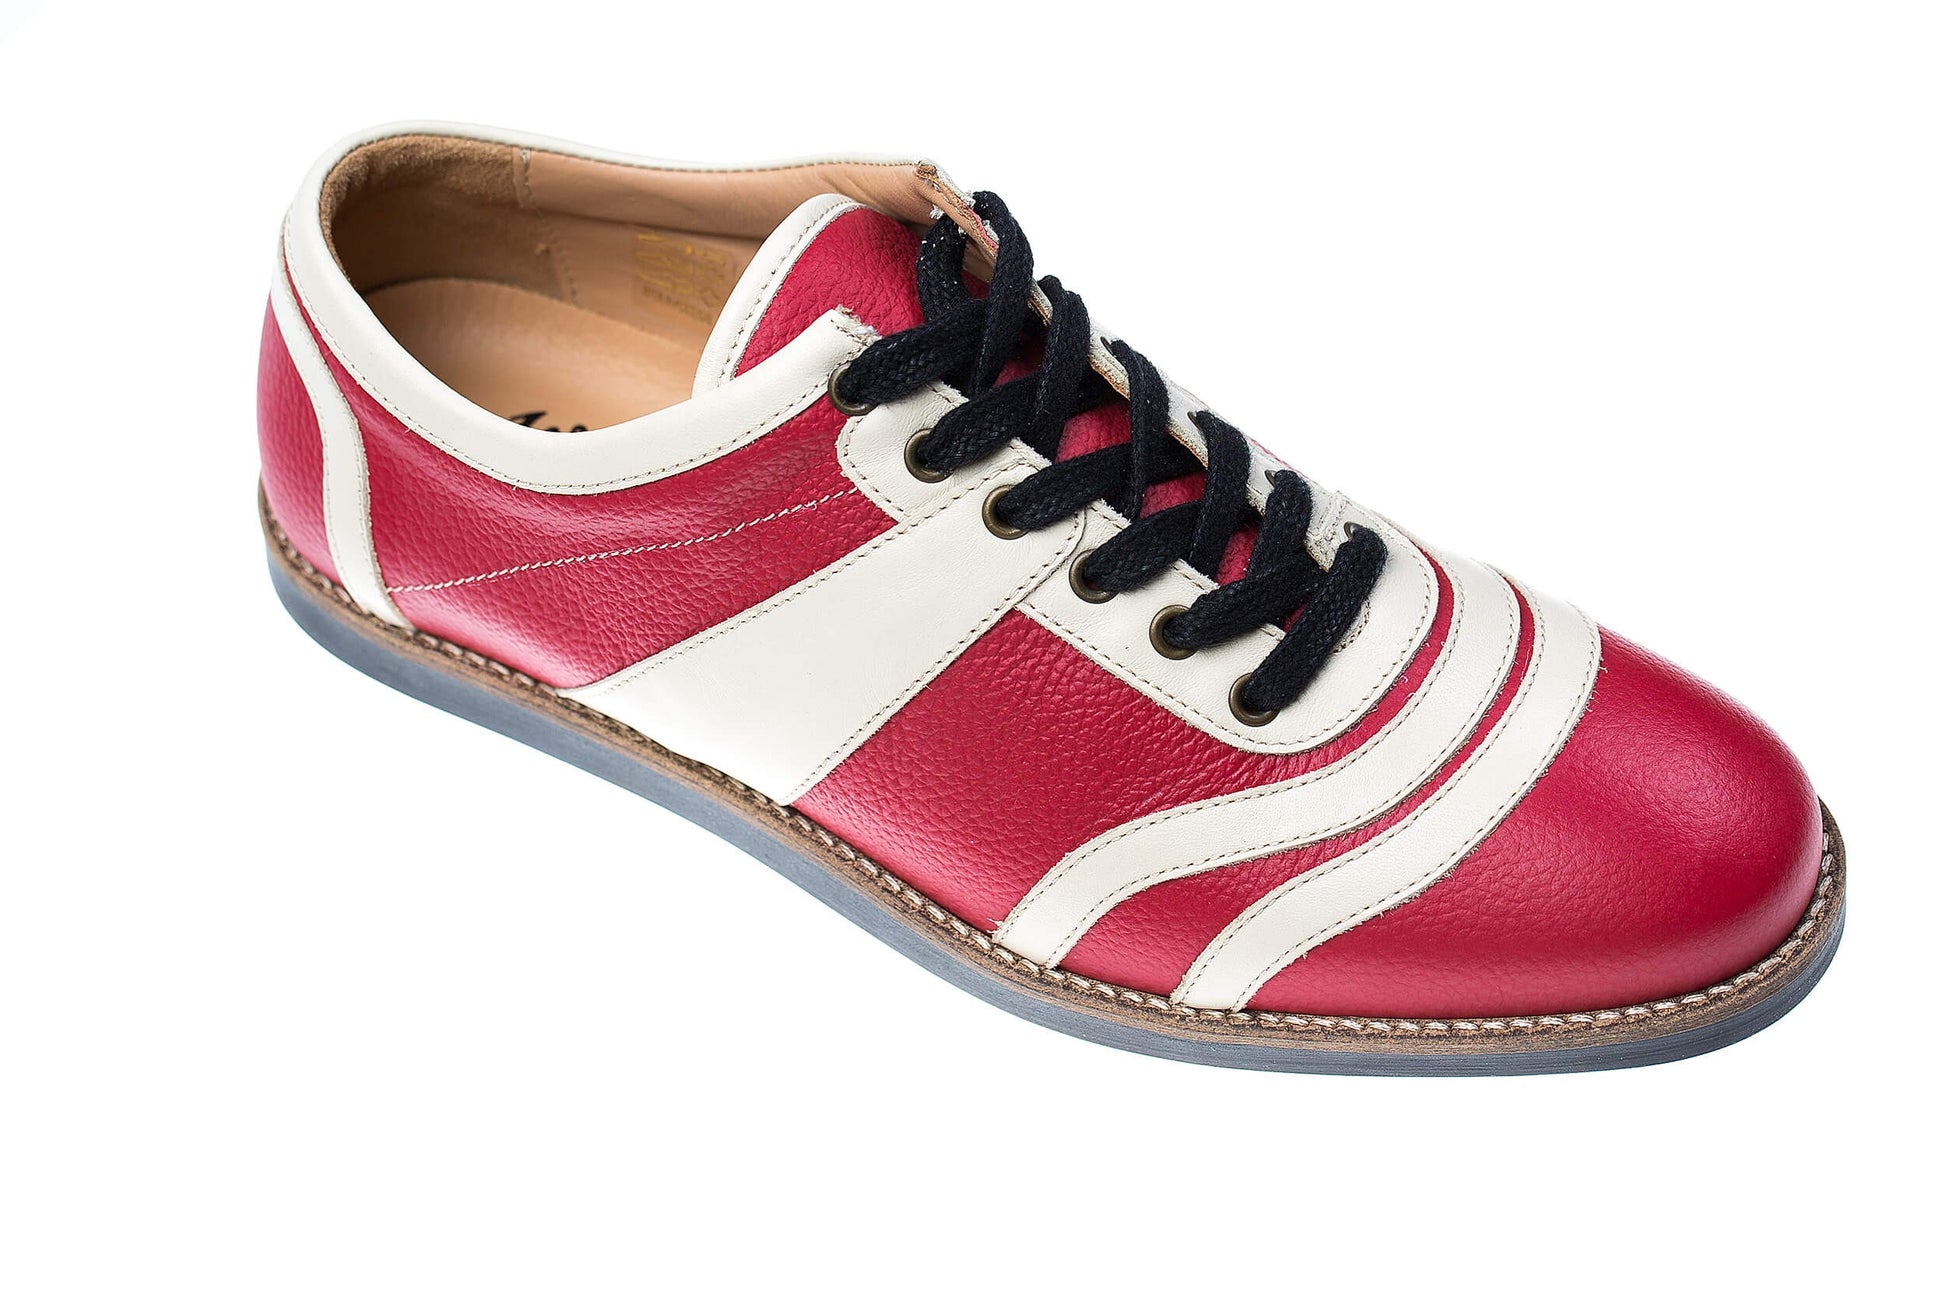 Retro Sneaker "The Bowler" rot weiß